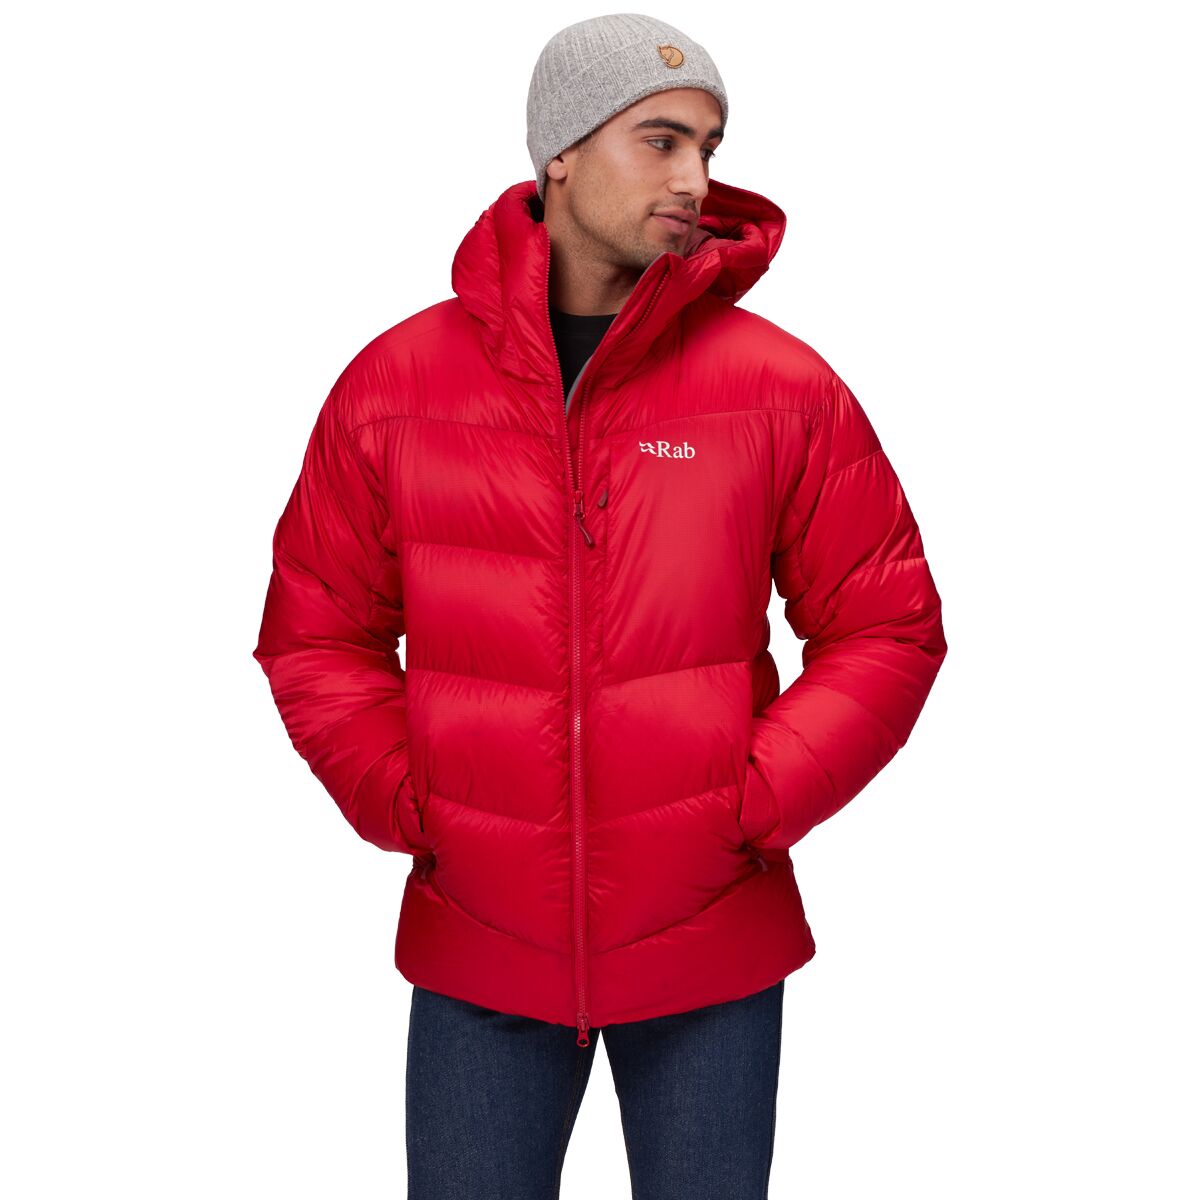 Rab Mens Andes Jacket Warm Durable Technical Down Winter Jacket